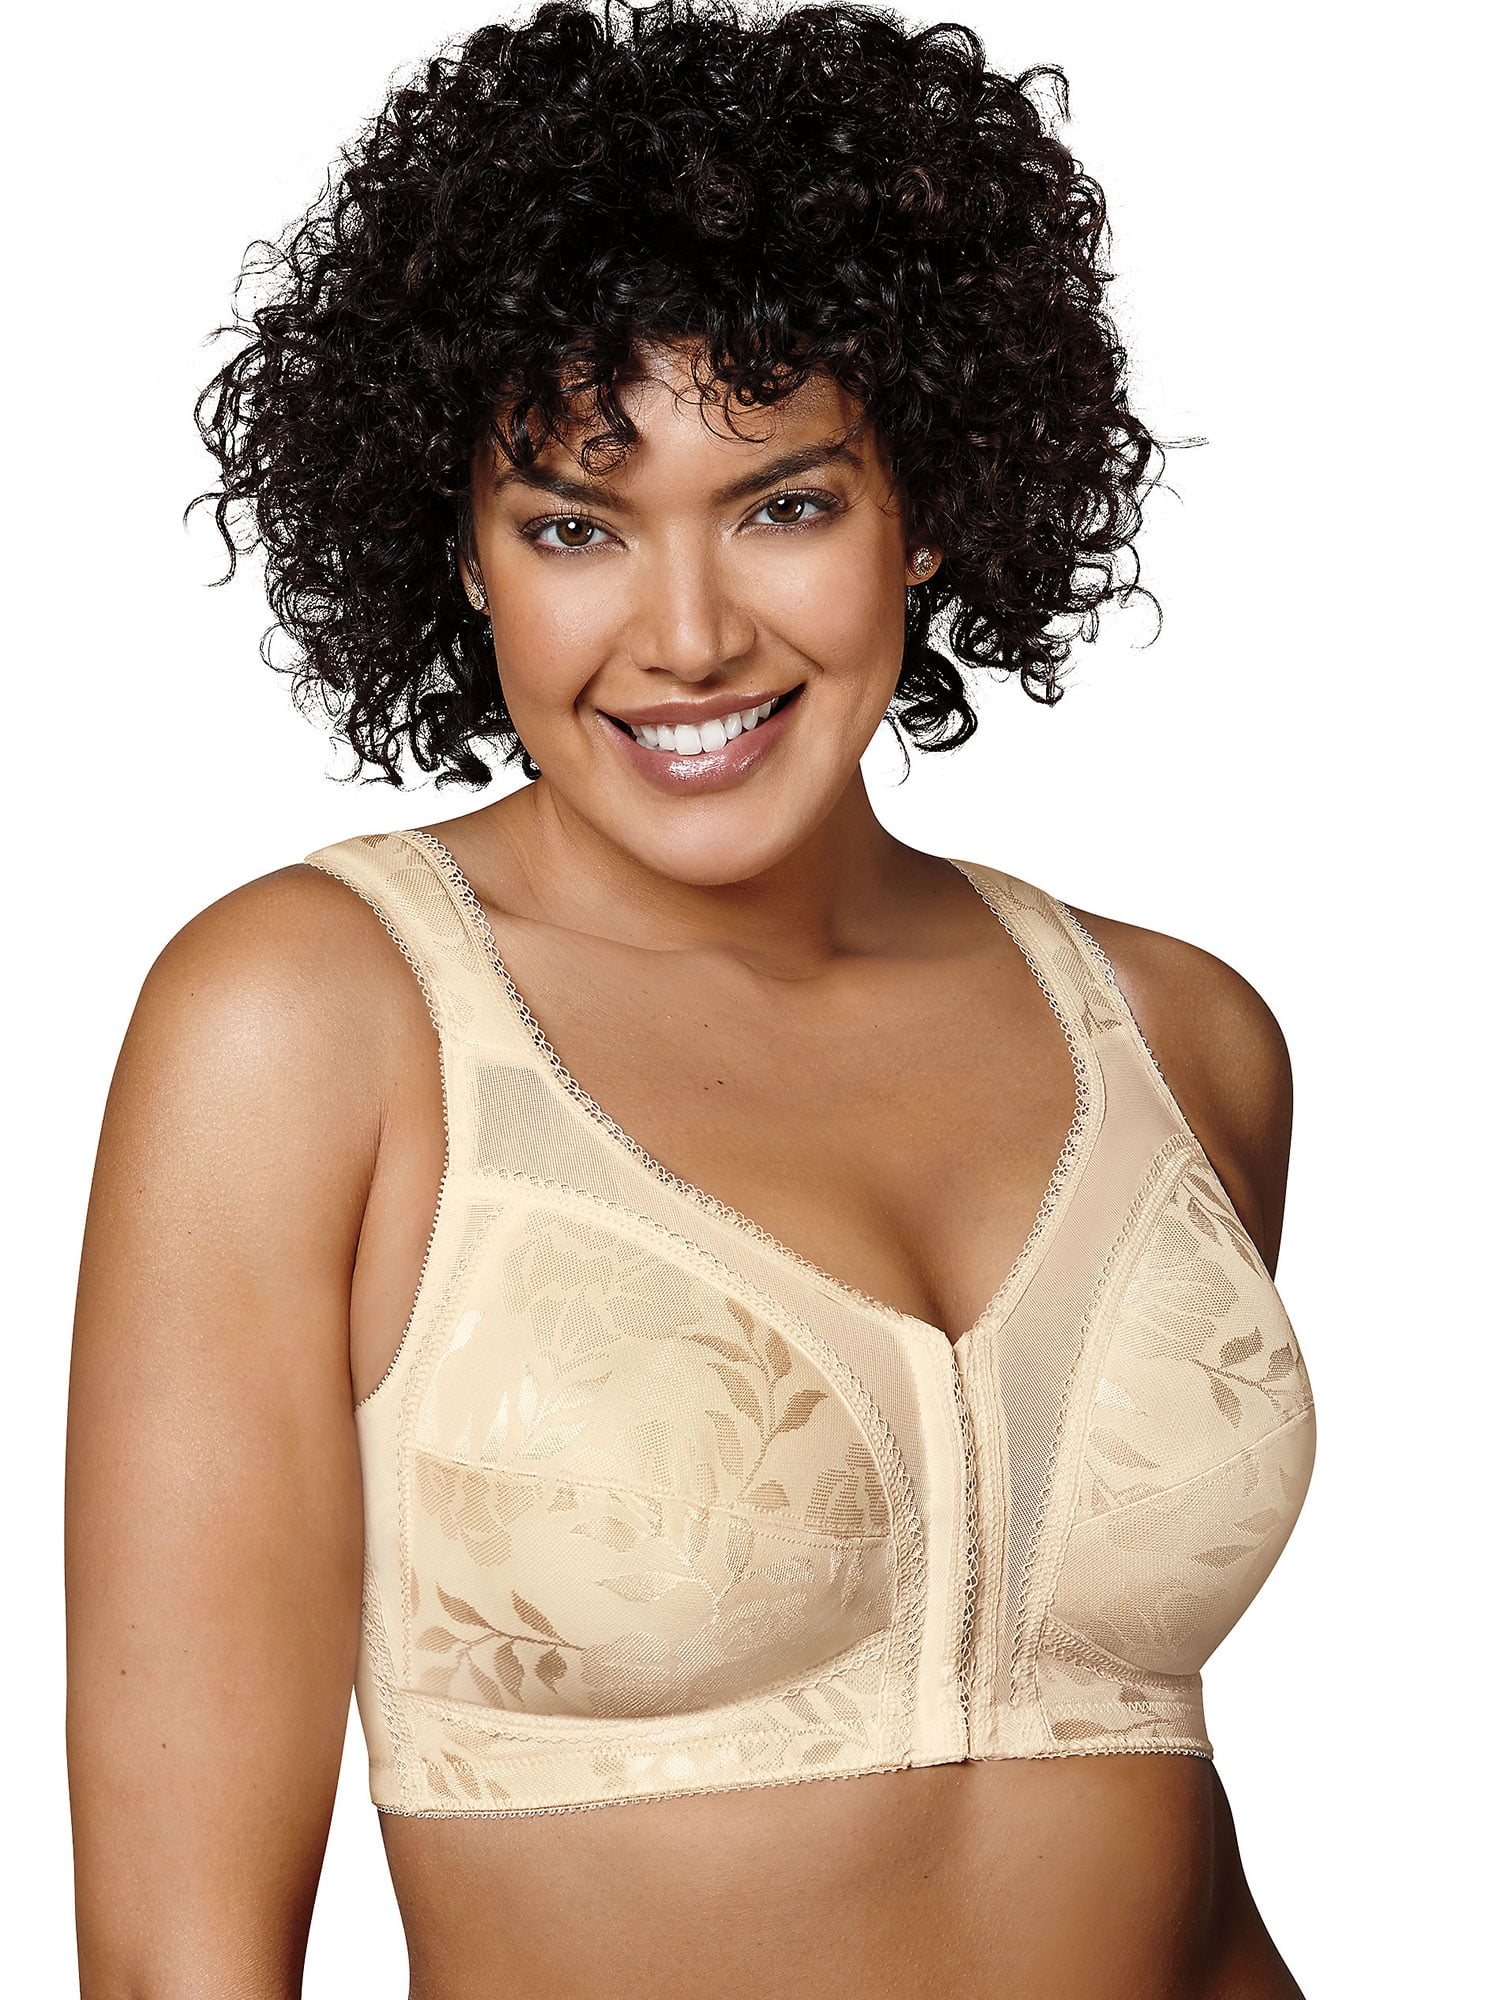 Playtex Wirefree Bra 18 Hour 4695 Front-Close With Flex Back M Frame  Breathable Women's